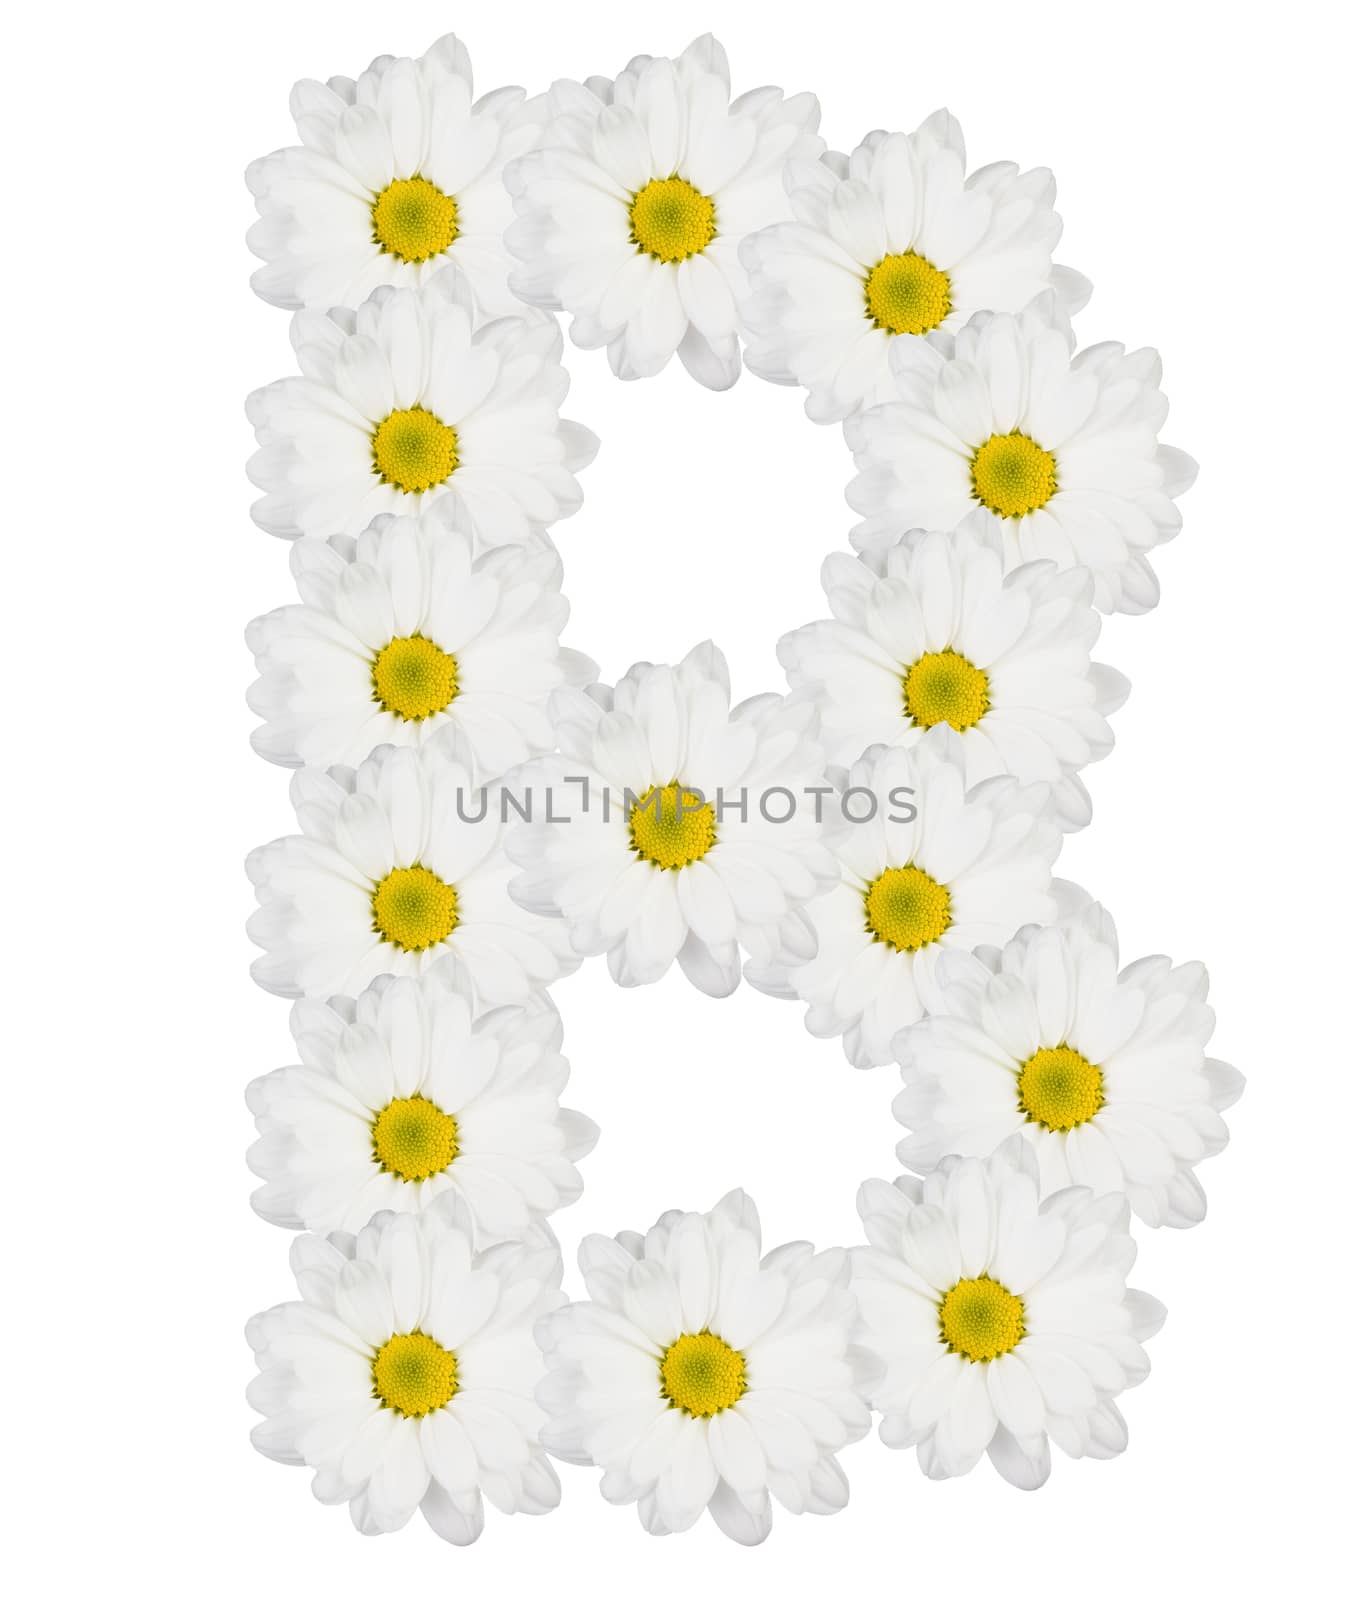 Letter B made from white flowers